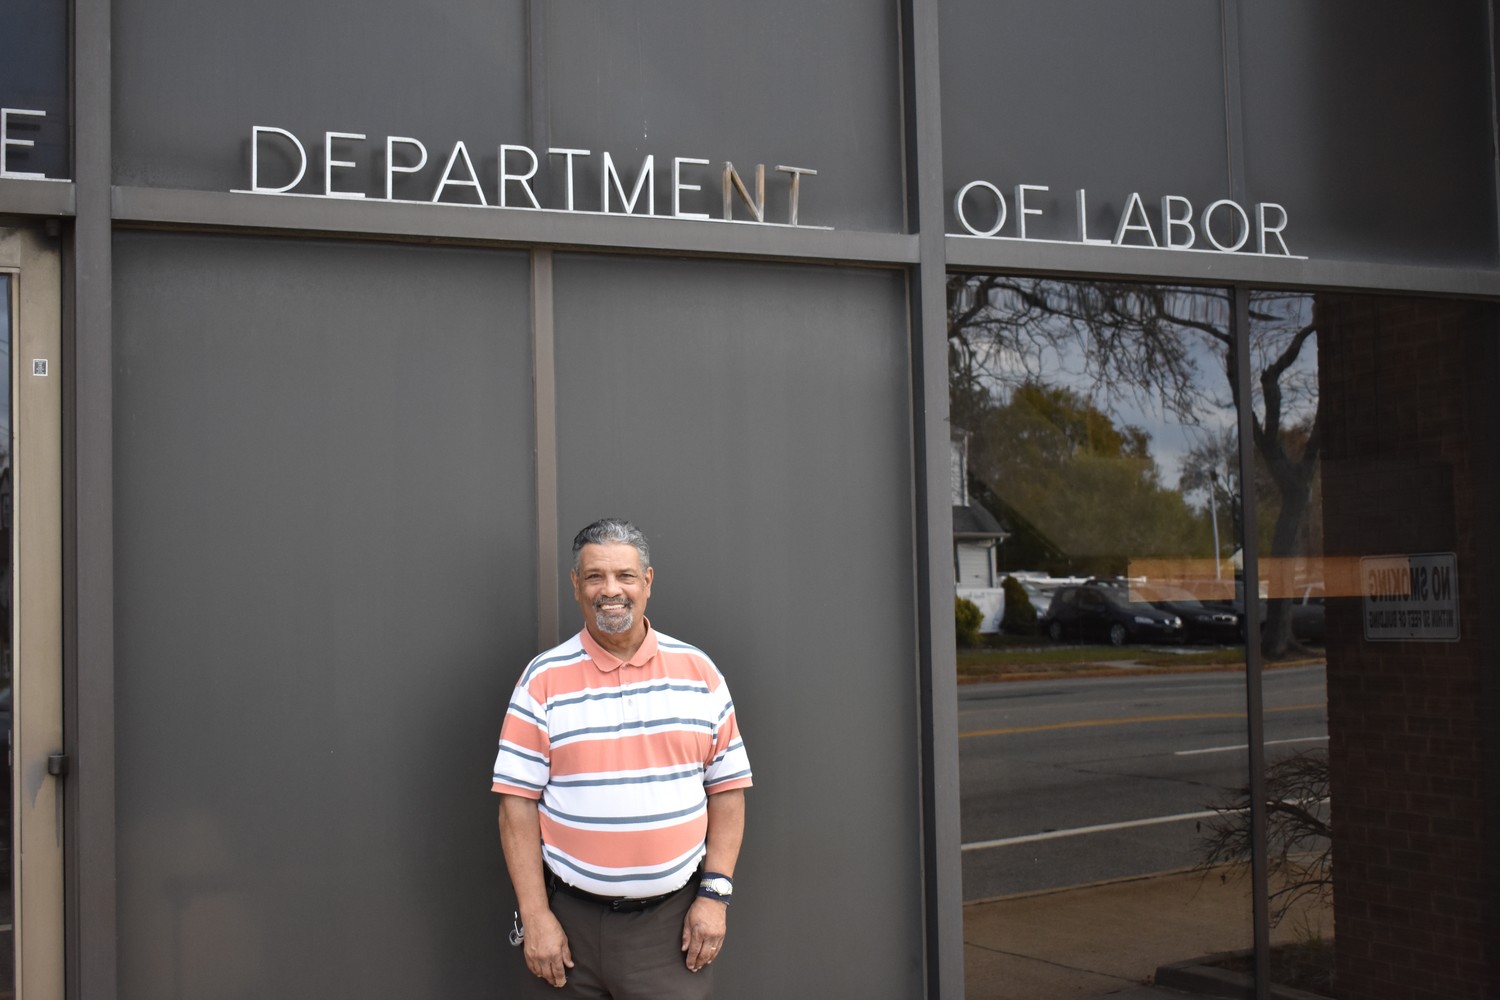 Joseph Forte landed his dream job at the New York State Department of Labor’s Hickville Career Center in 2009, and has worked hard there as a custodian.